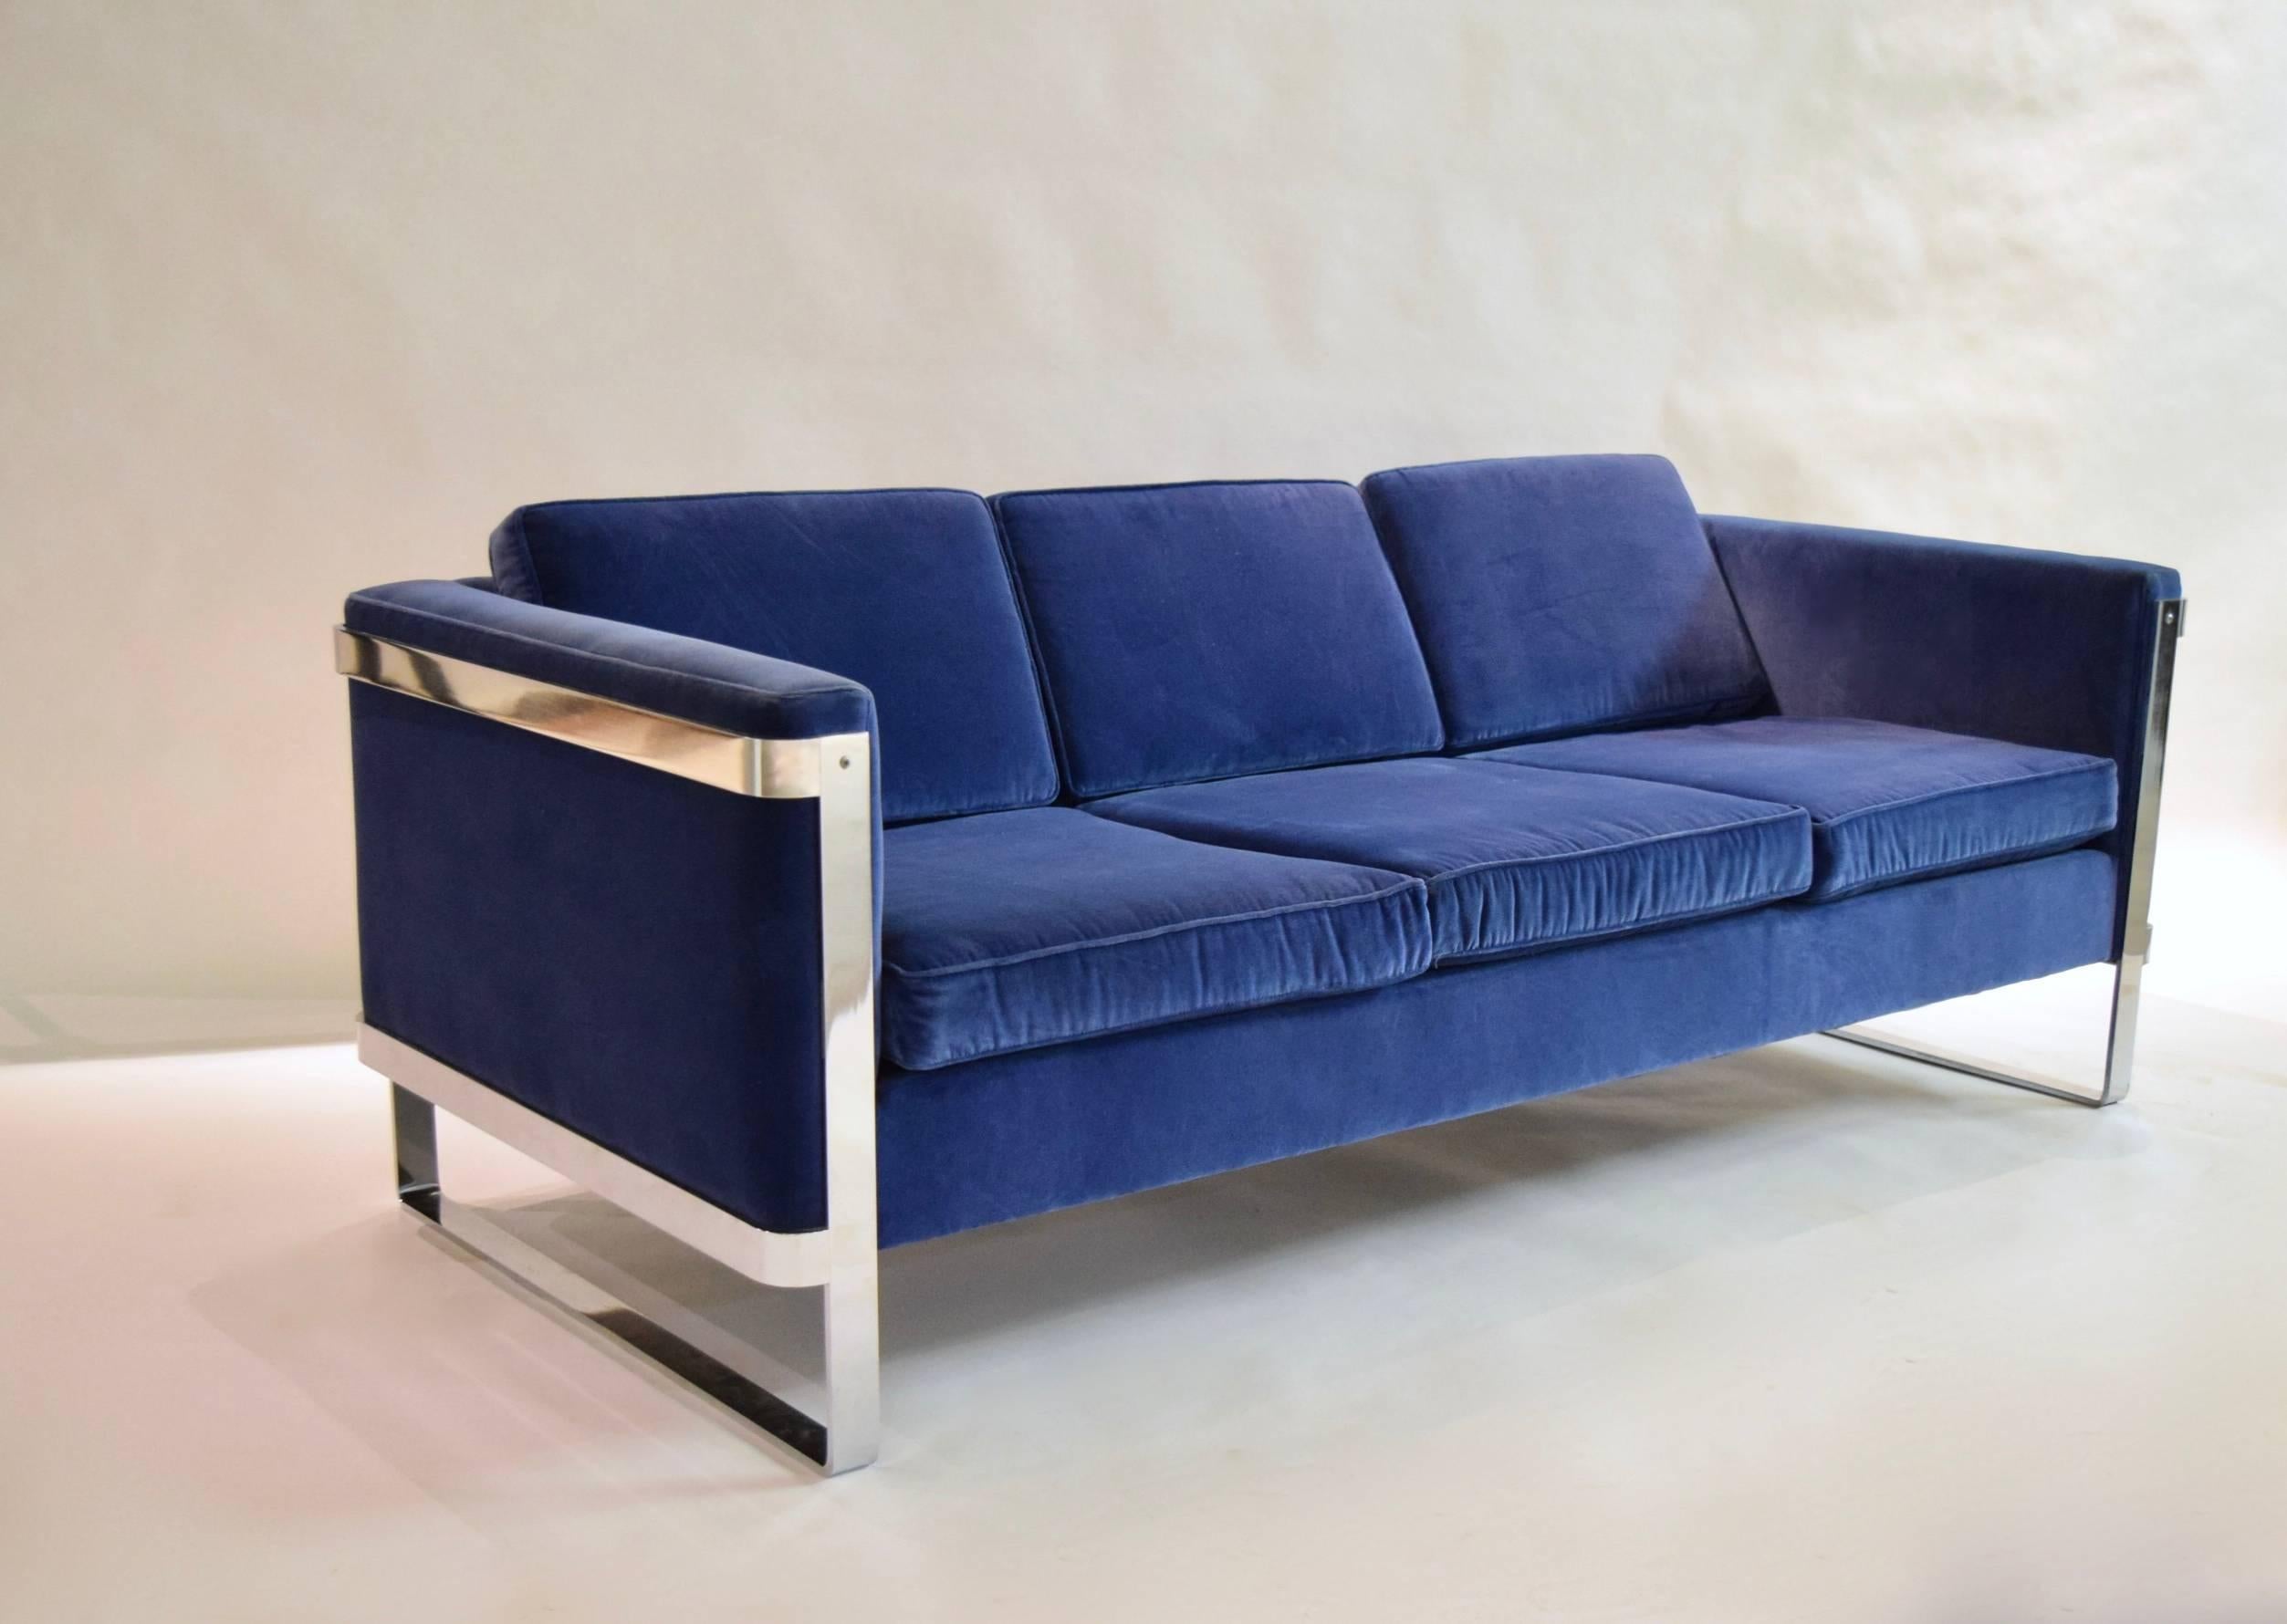 Pace Collection three-seat sofa with a solid, polished steel frame and recently upholstered in blue velvet. Arm height measures 25.5